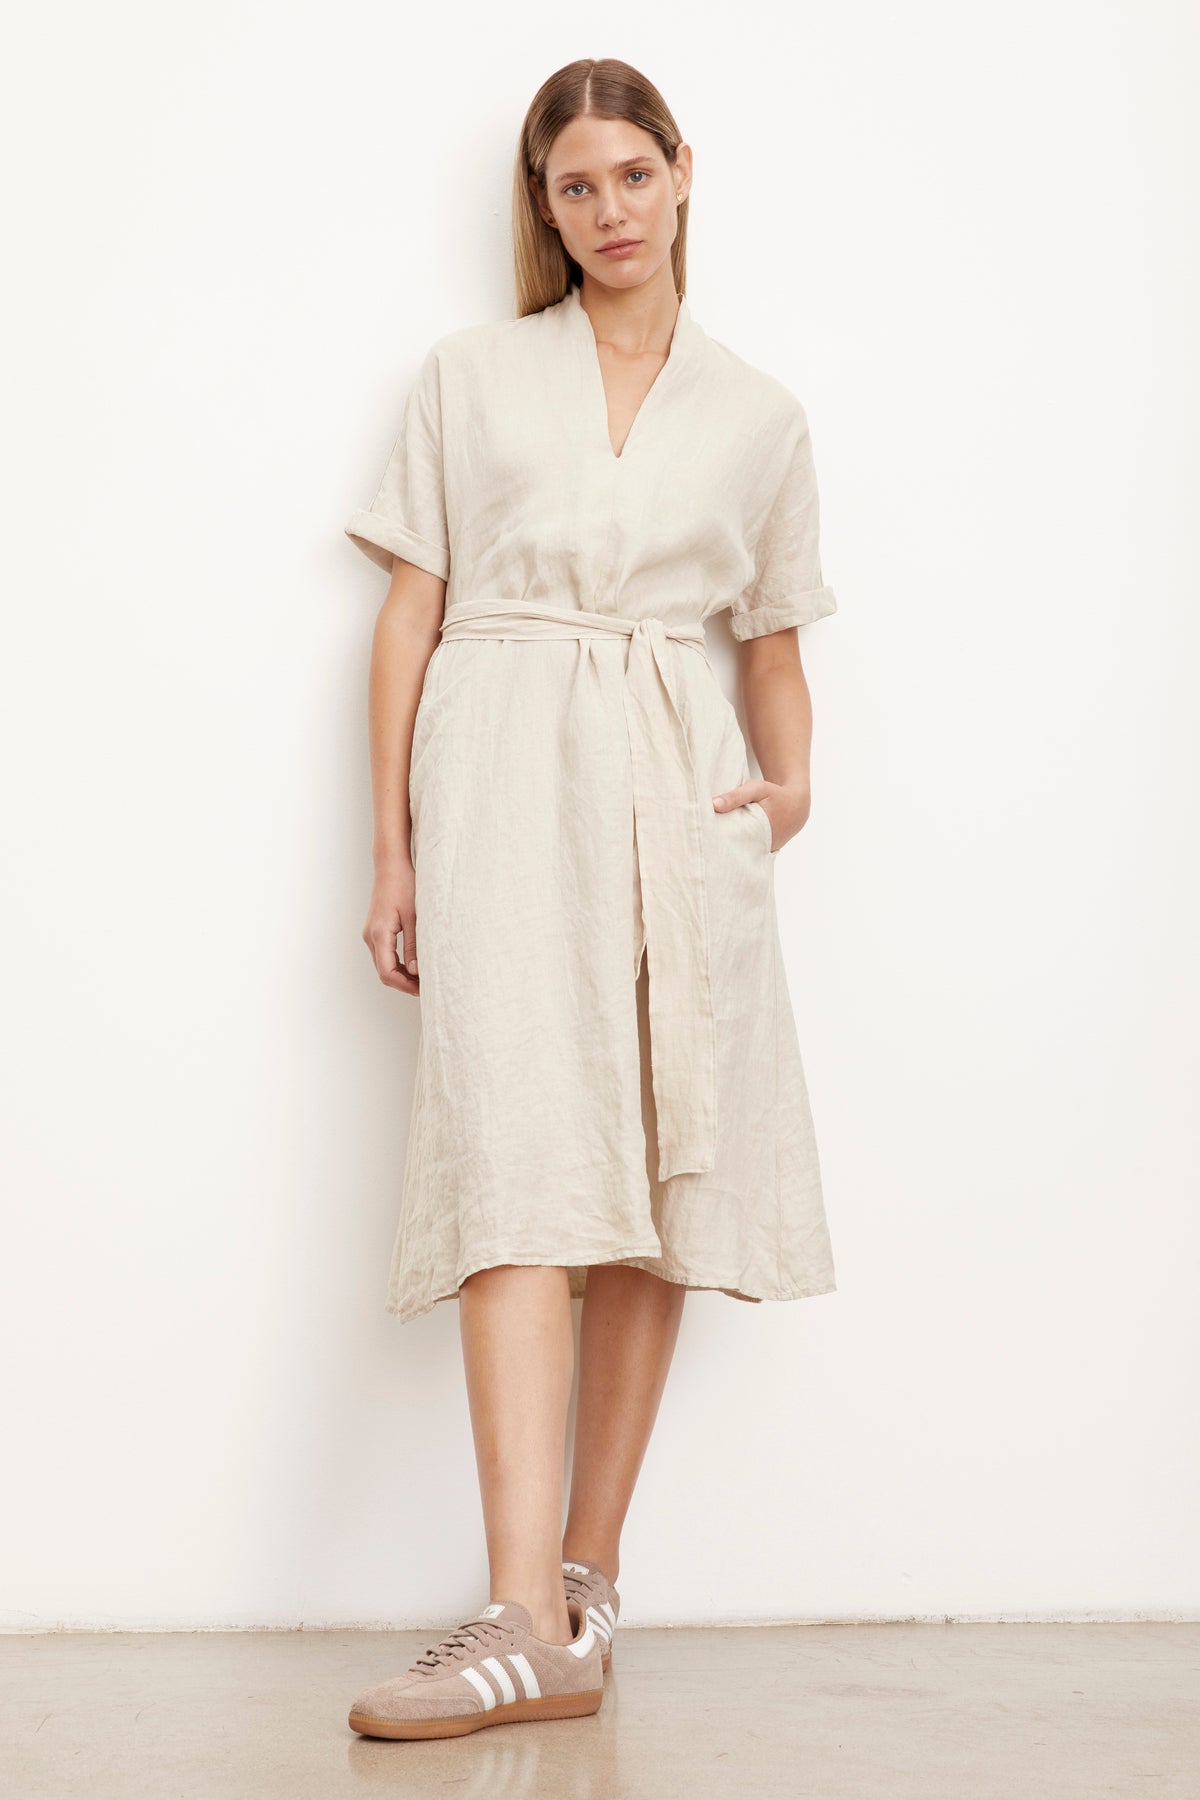   Woman leaning against wall wearing Winley Dress in sand colored linen belted with hand in pocket full length front 